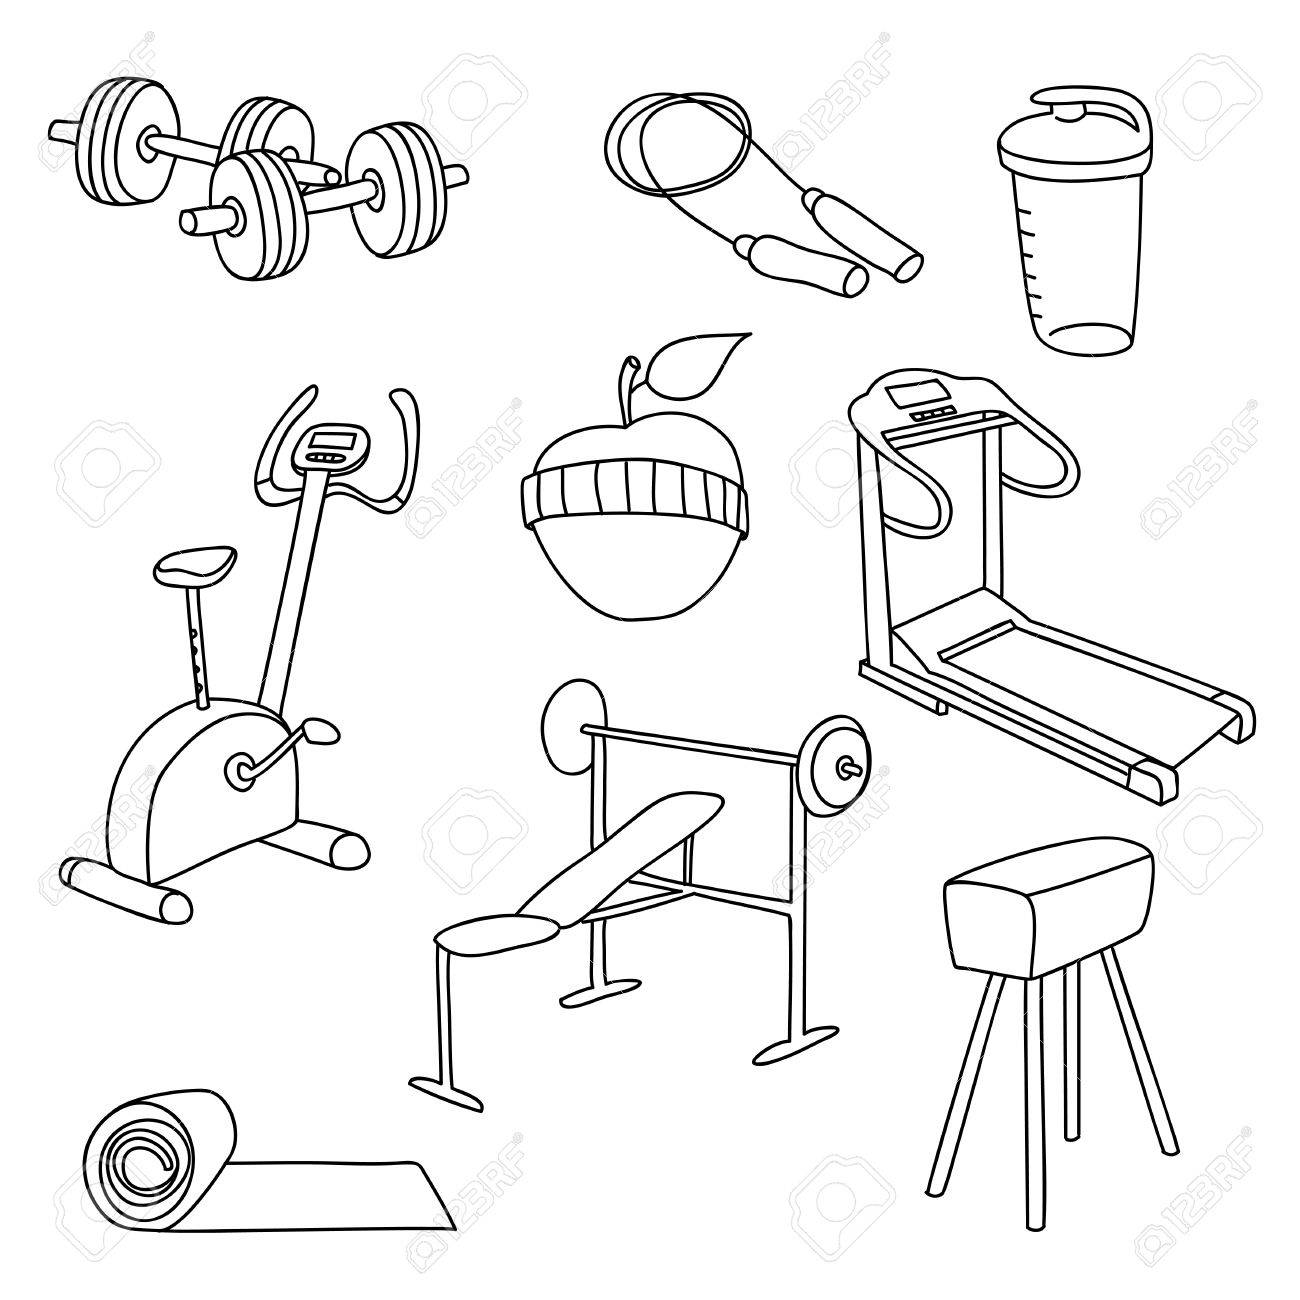  Workout equipment drawings for Build Muscle